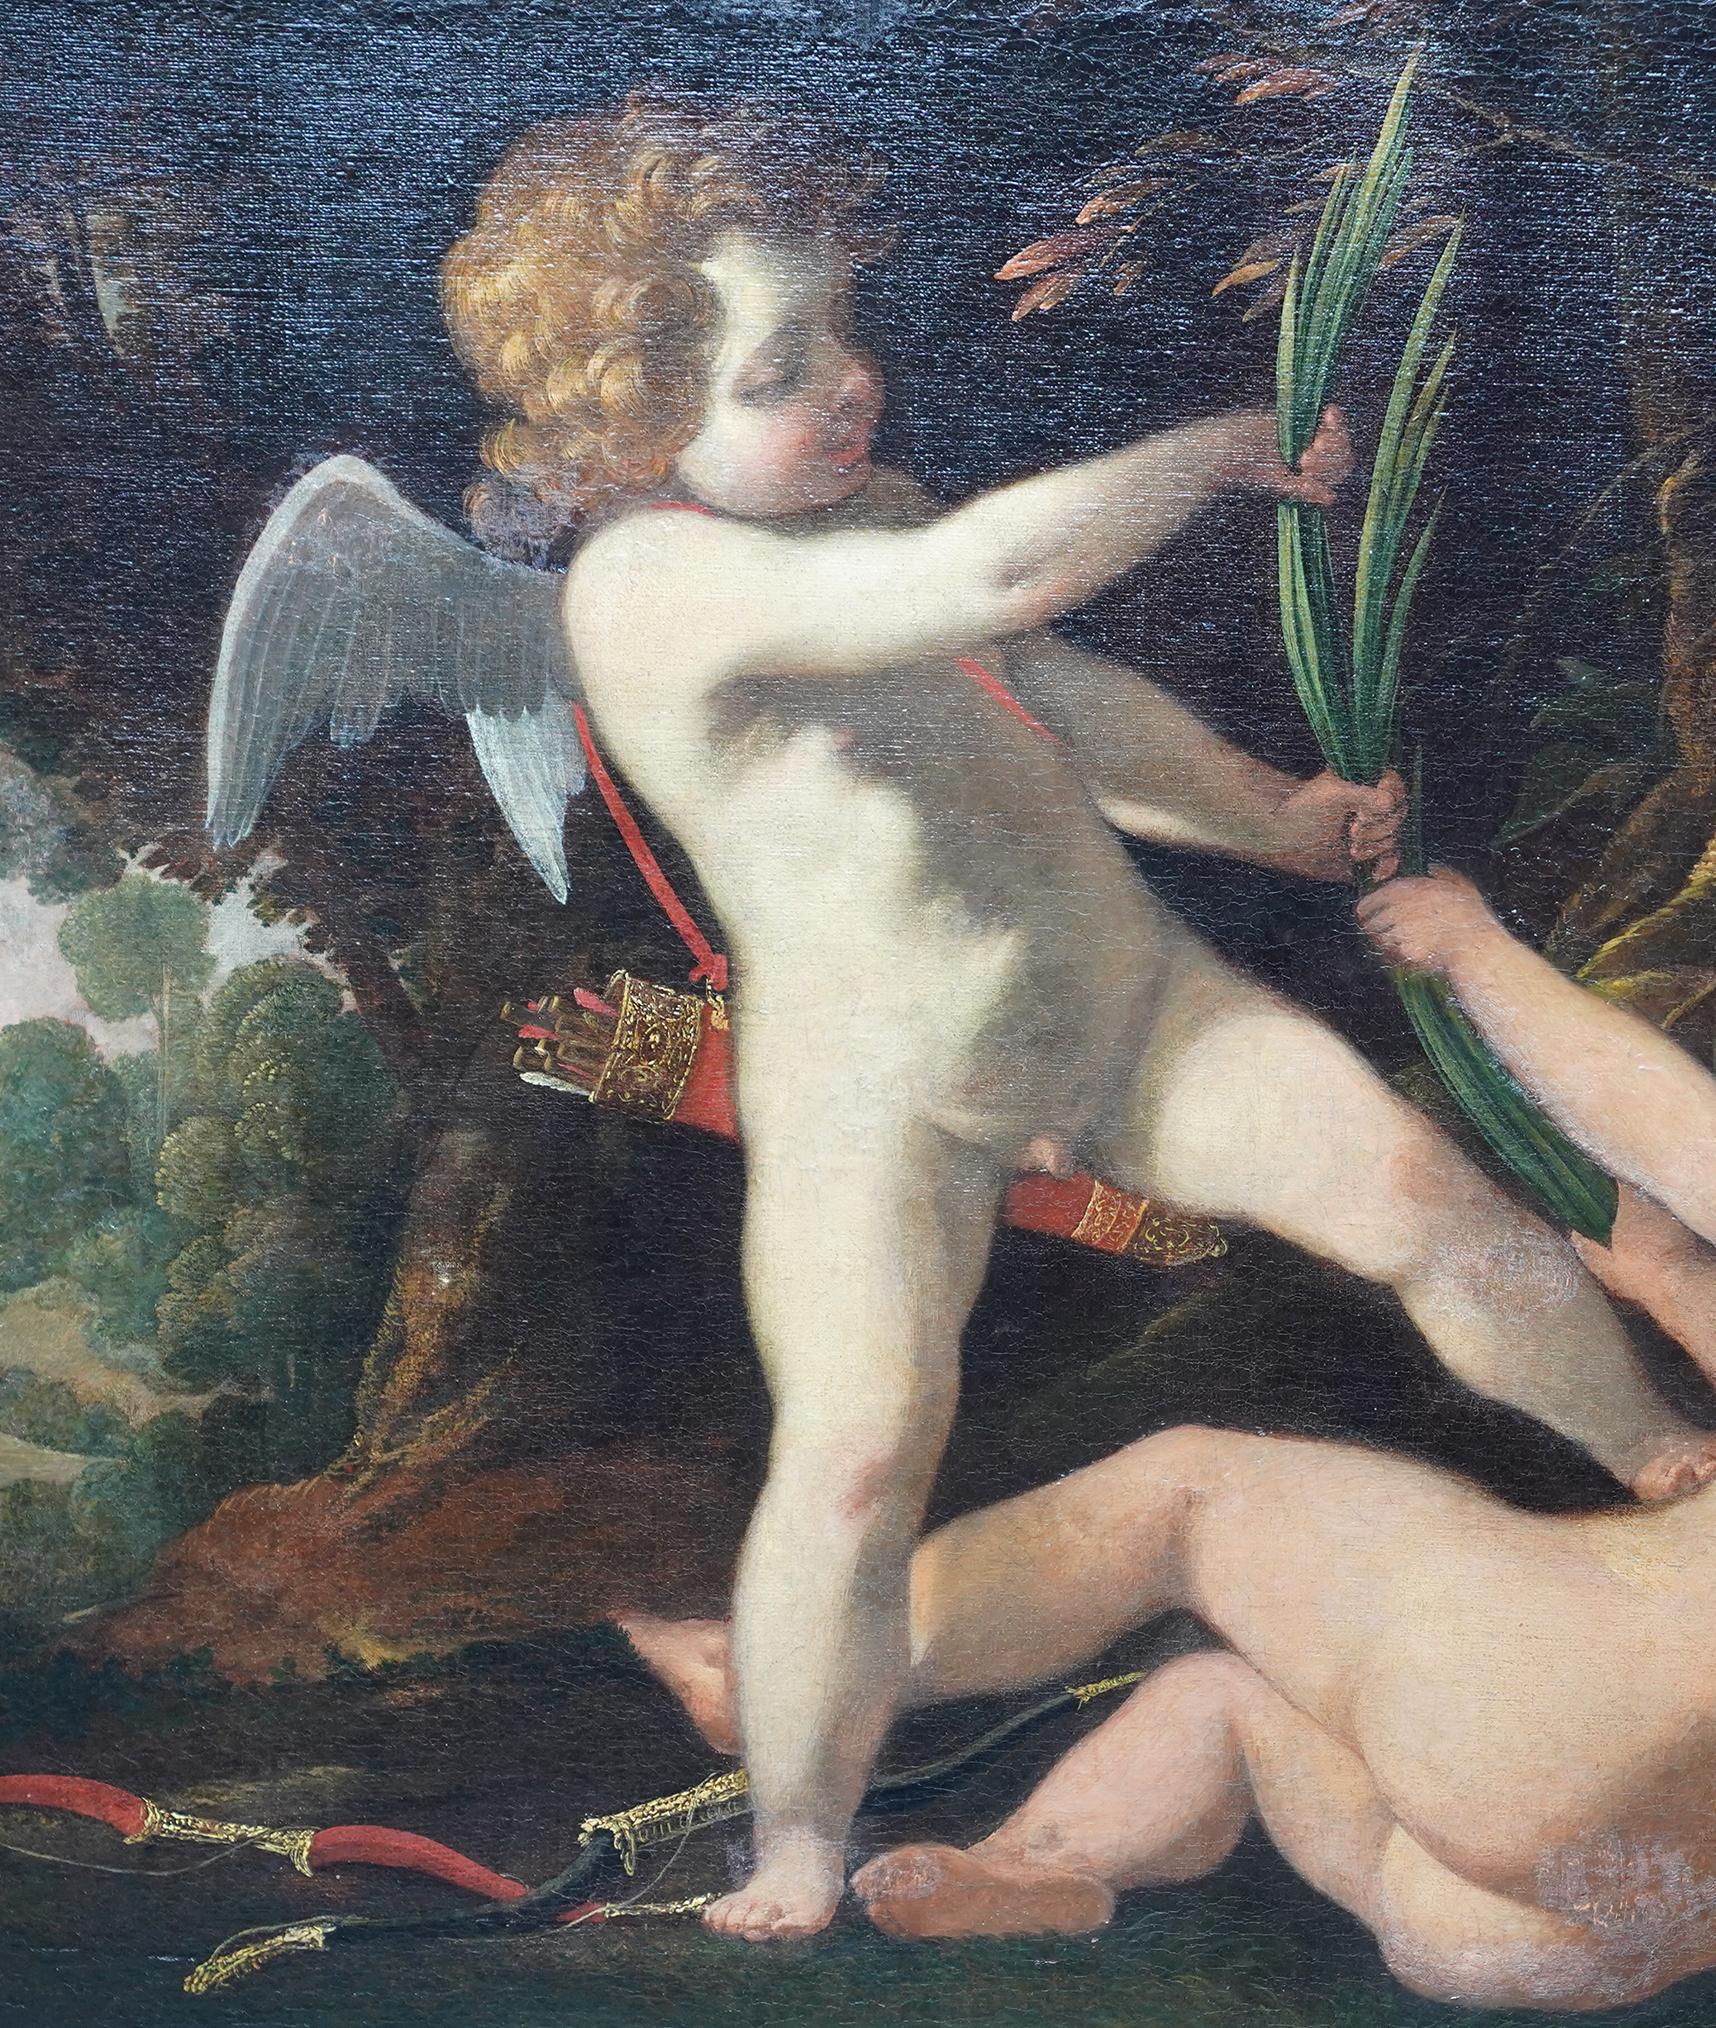 This stunning French 17th century Old Master oil painting is by Baroque artist Laurent de la Hyre. It was painted circa 1645 and has excellent provenance from Christie's.  The painting is a superb large oil on canvas depicting two Putti or winged